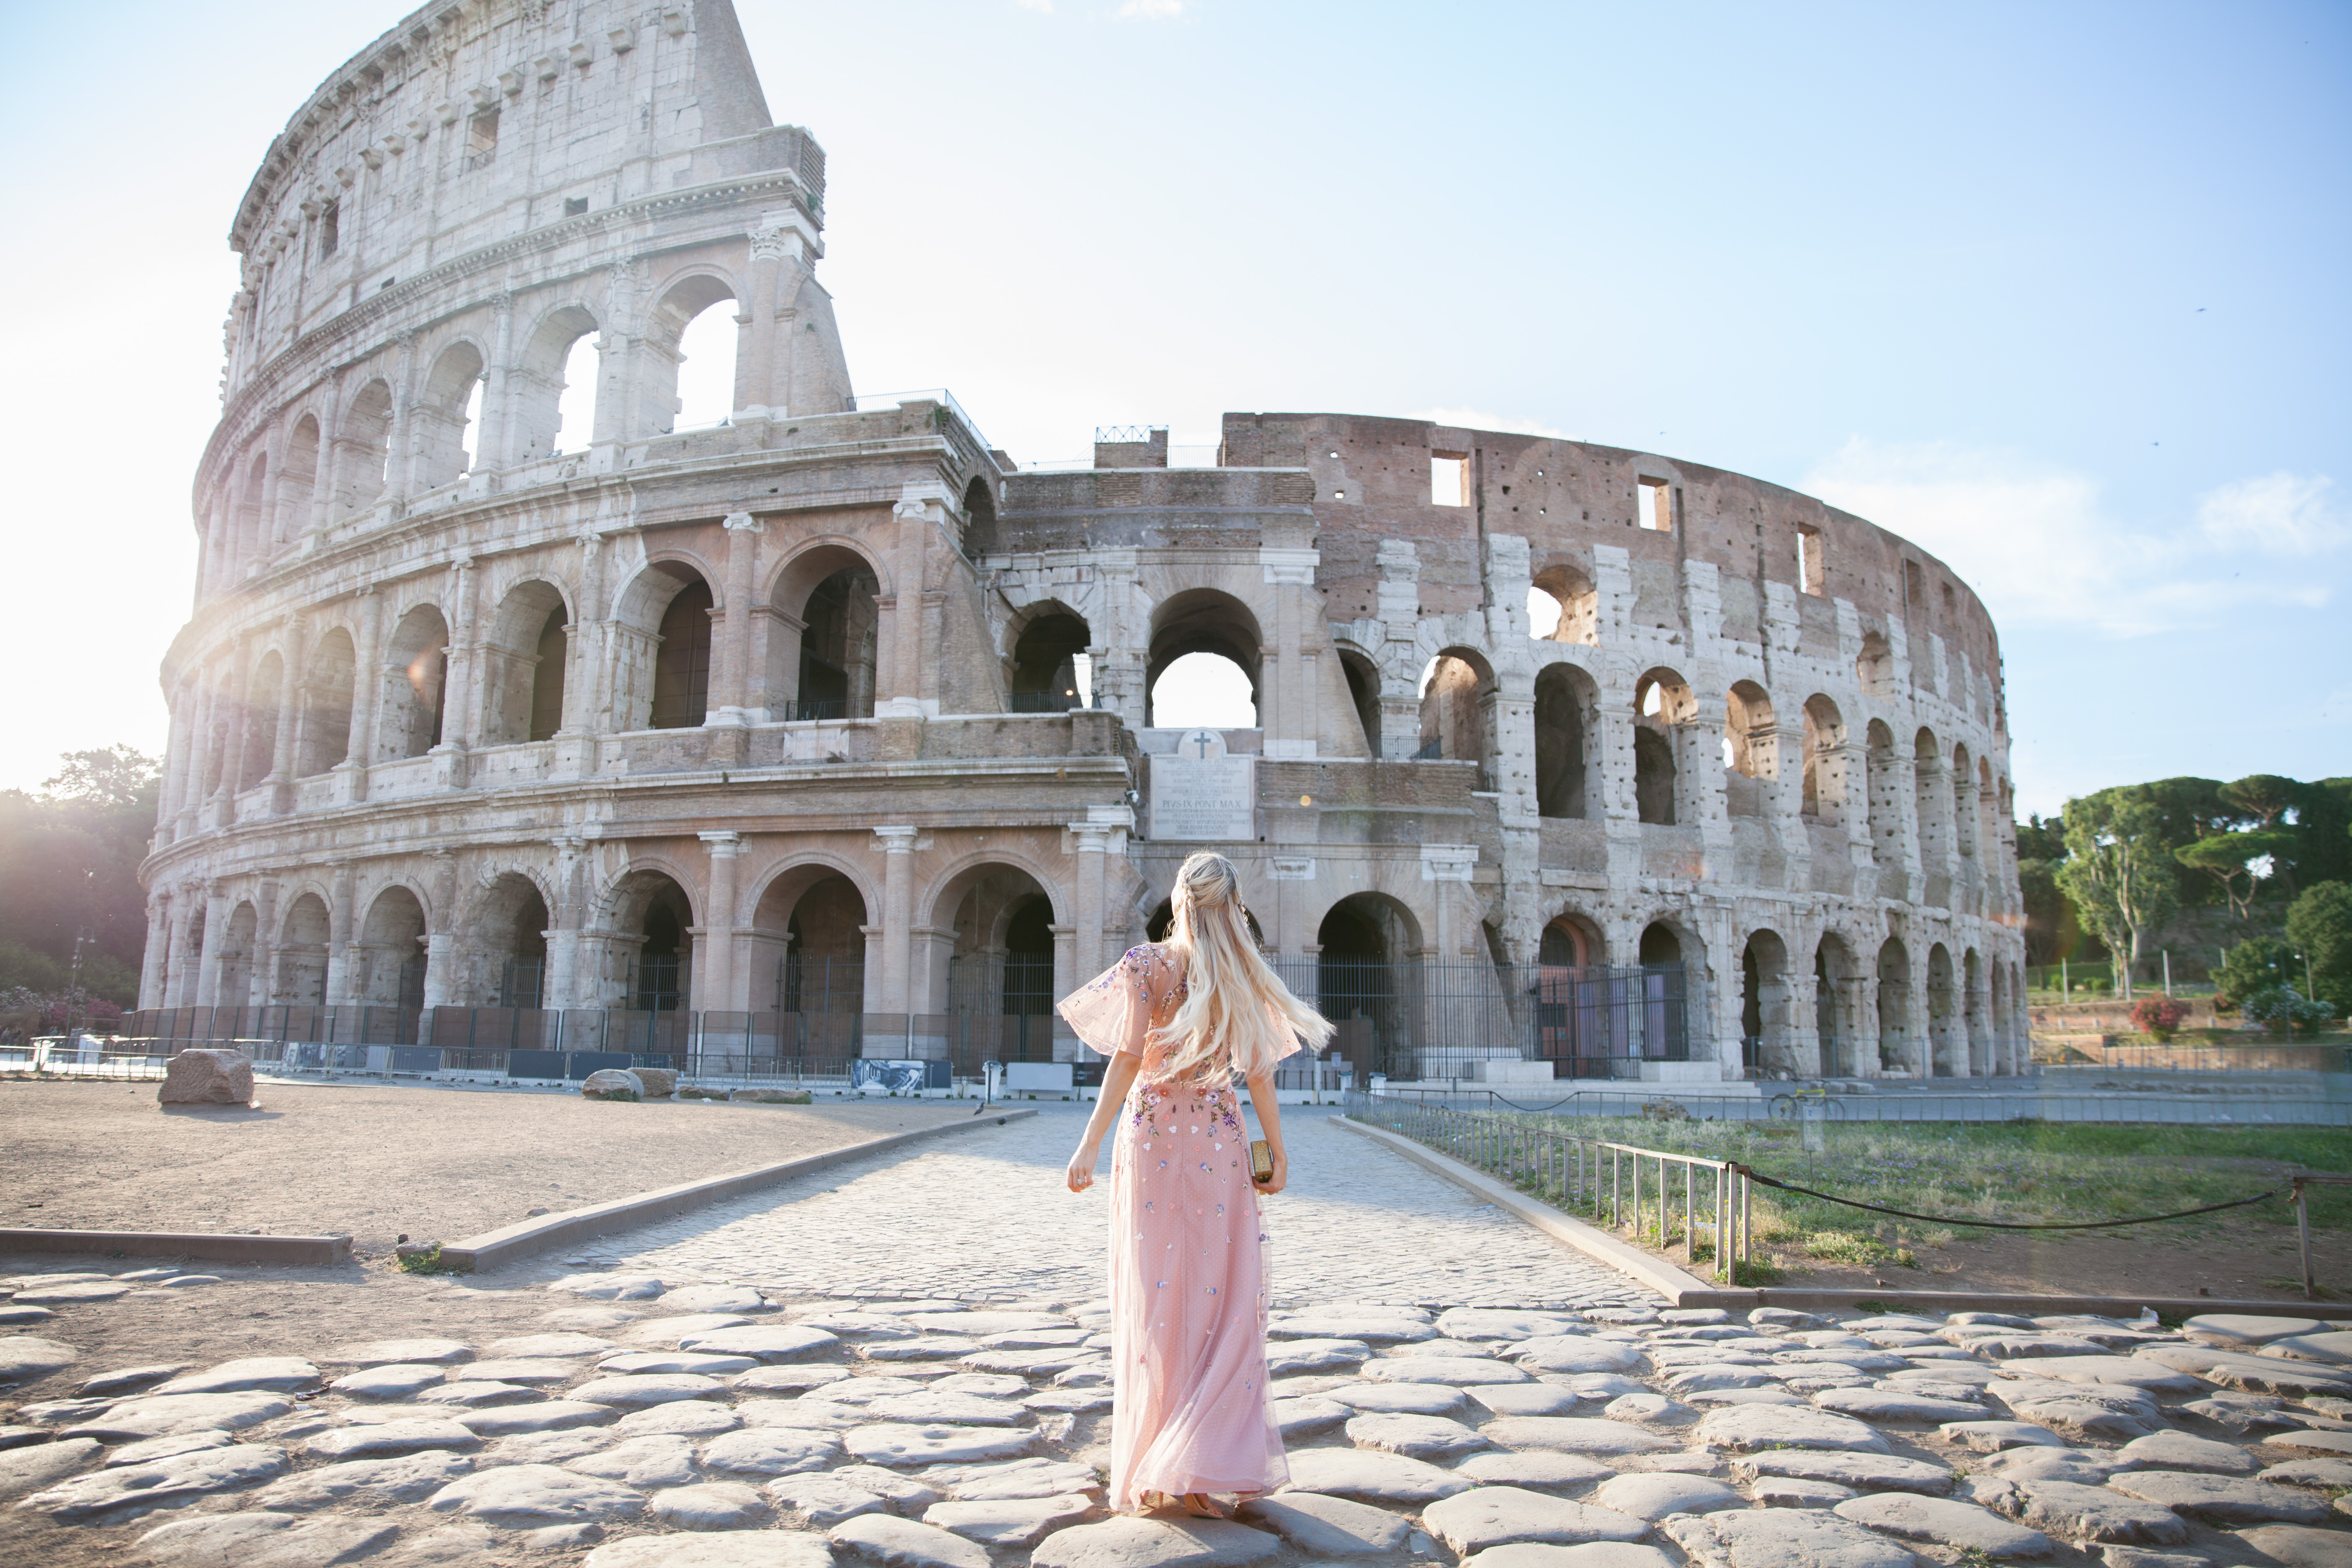 ASOS DESIGN Bridesmaid floral embroidered dobby mesh flutter sleeve maxi dress in Rome  | ASOS floral embroidered maxi dress featured by top San Francisco fashion blog, Lombard and Fifth: image of a blonde woman wearing a floral maxi dress at the Colosseum in Rome